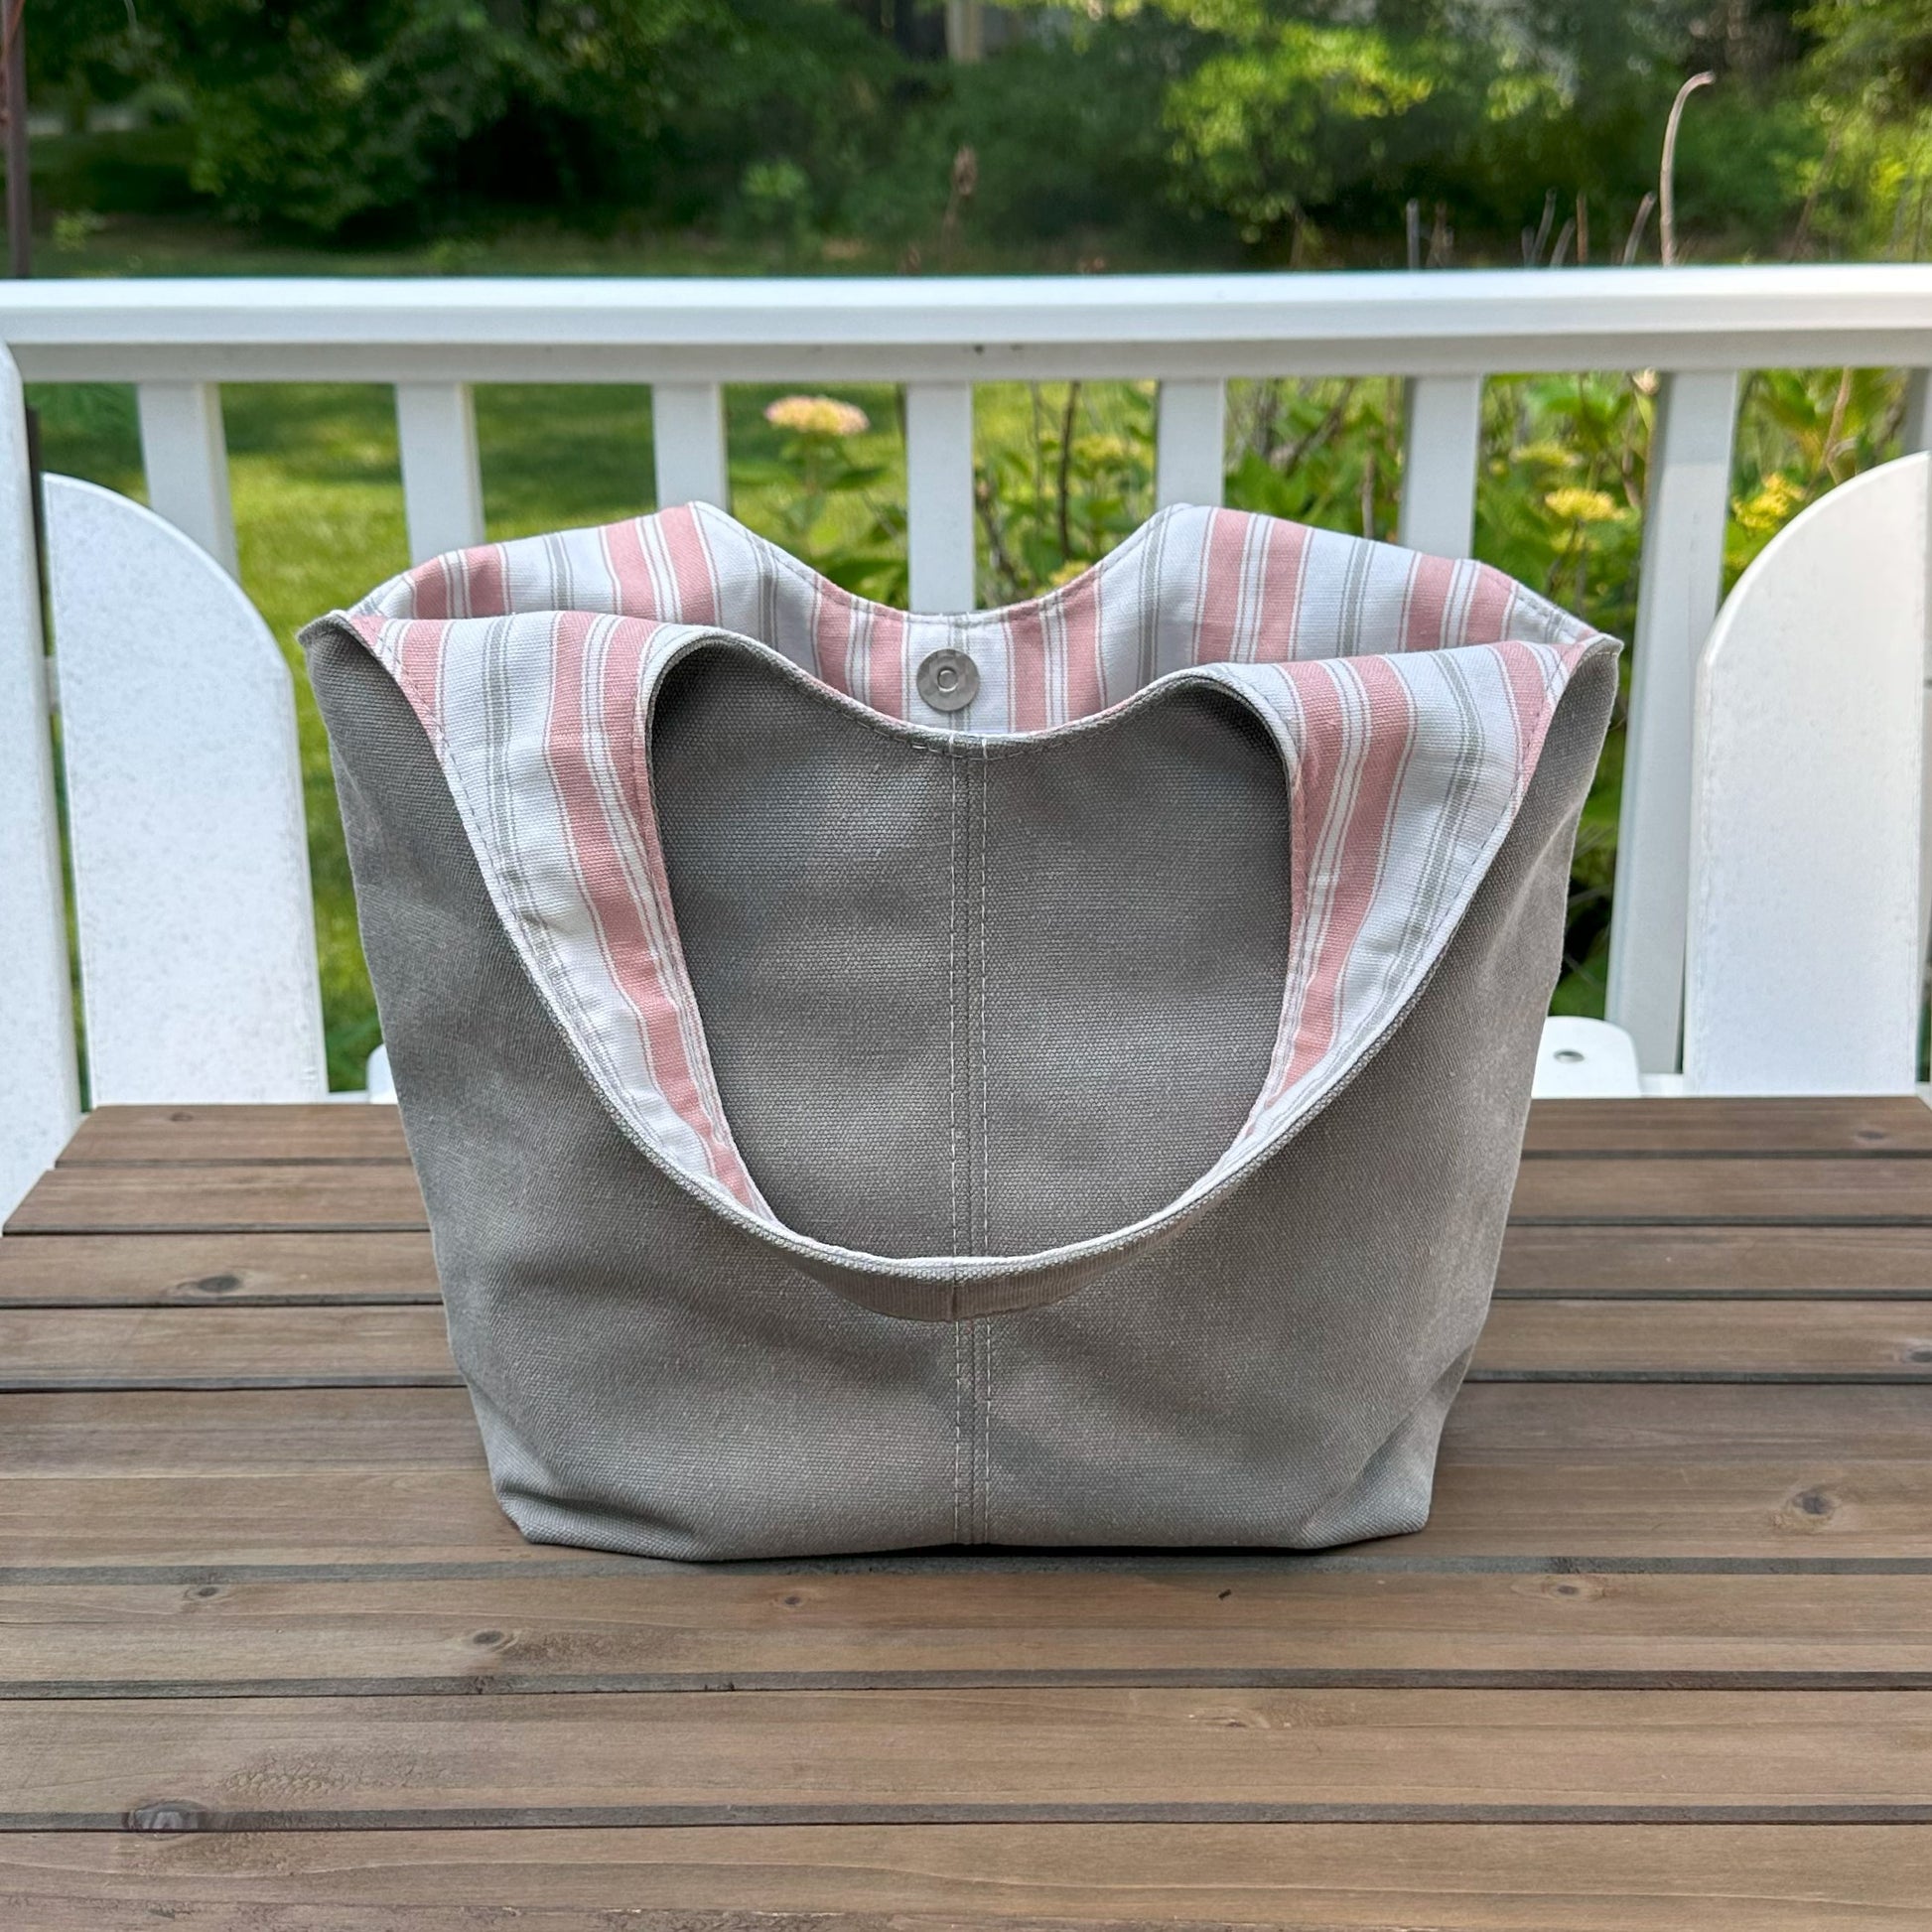 Light Grey Stone Washed Canvas and Blush Grey Canvas interior with Nickel Rivets Cambridge Shoulder Bag squirescanvascreations.com 